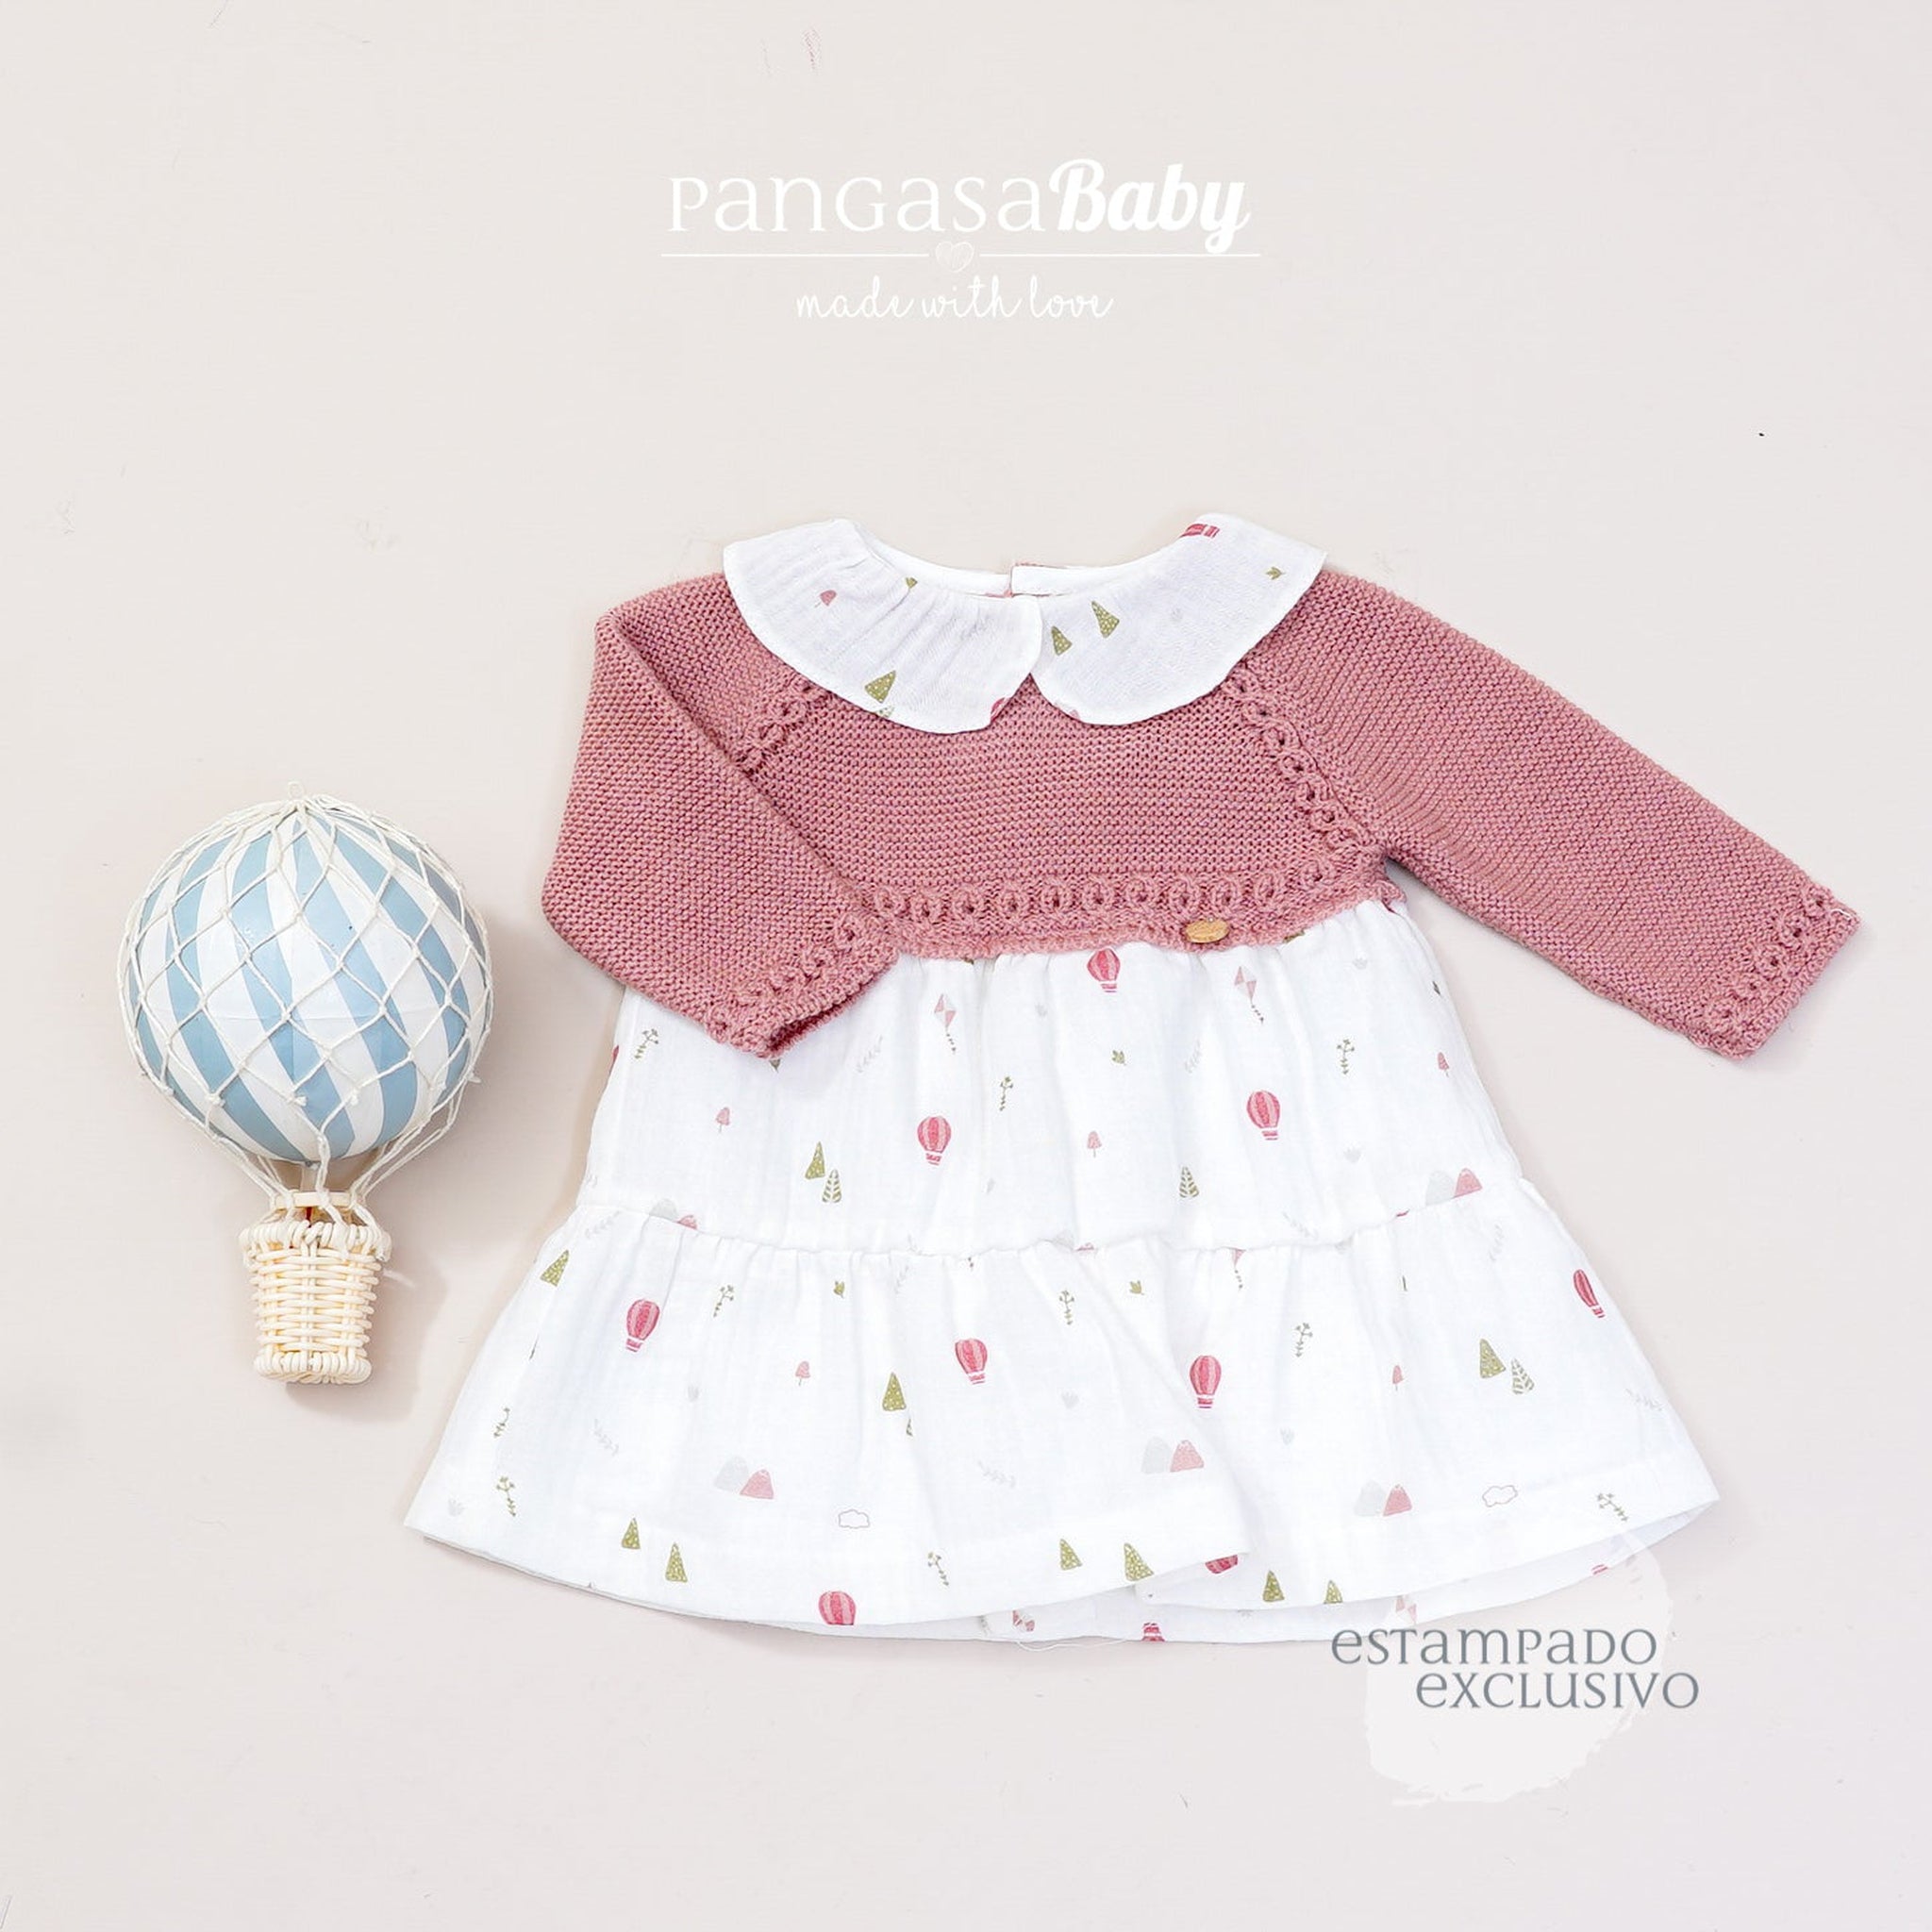 Dusty Pink Balloon Knitted Dress